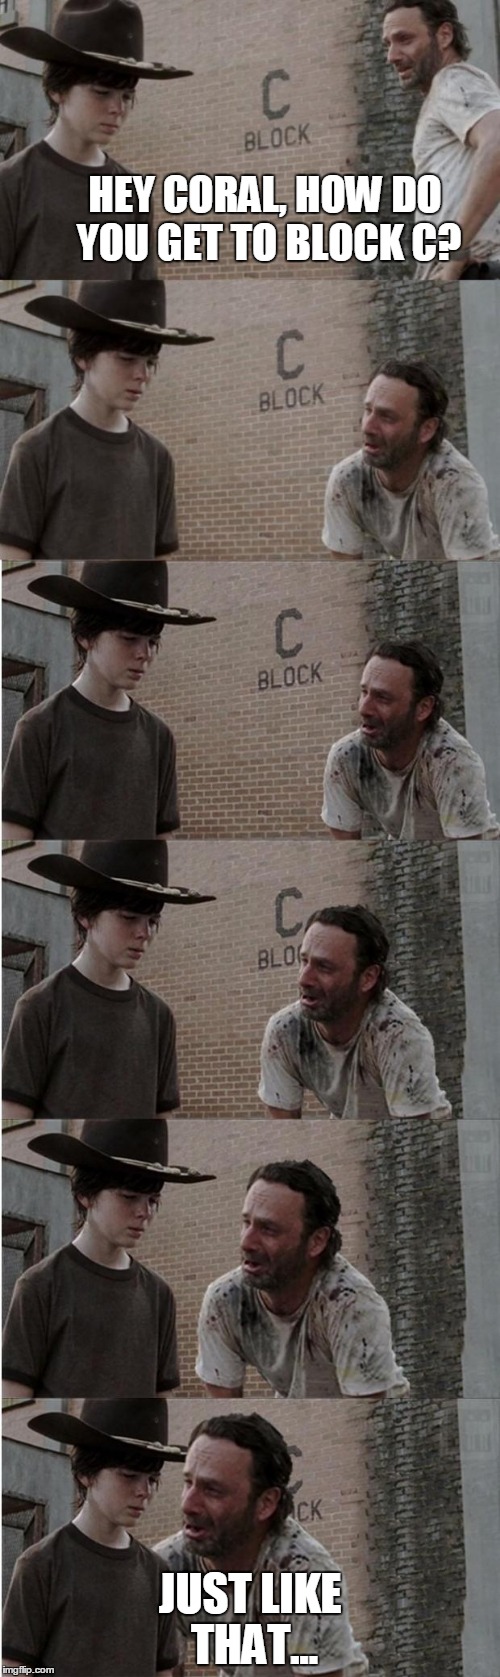 Rick and Carl Longer | HEY CORAL, HOW DO YOU GET TO BLOCK C? JUST LIKE THAT... | image tagged in memes,rick and carl longer | made w/ Imgflip meme maker